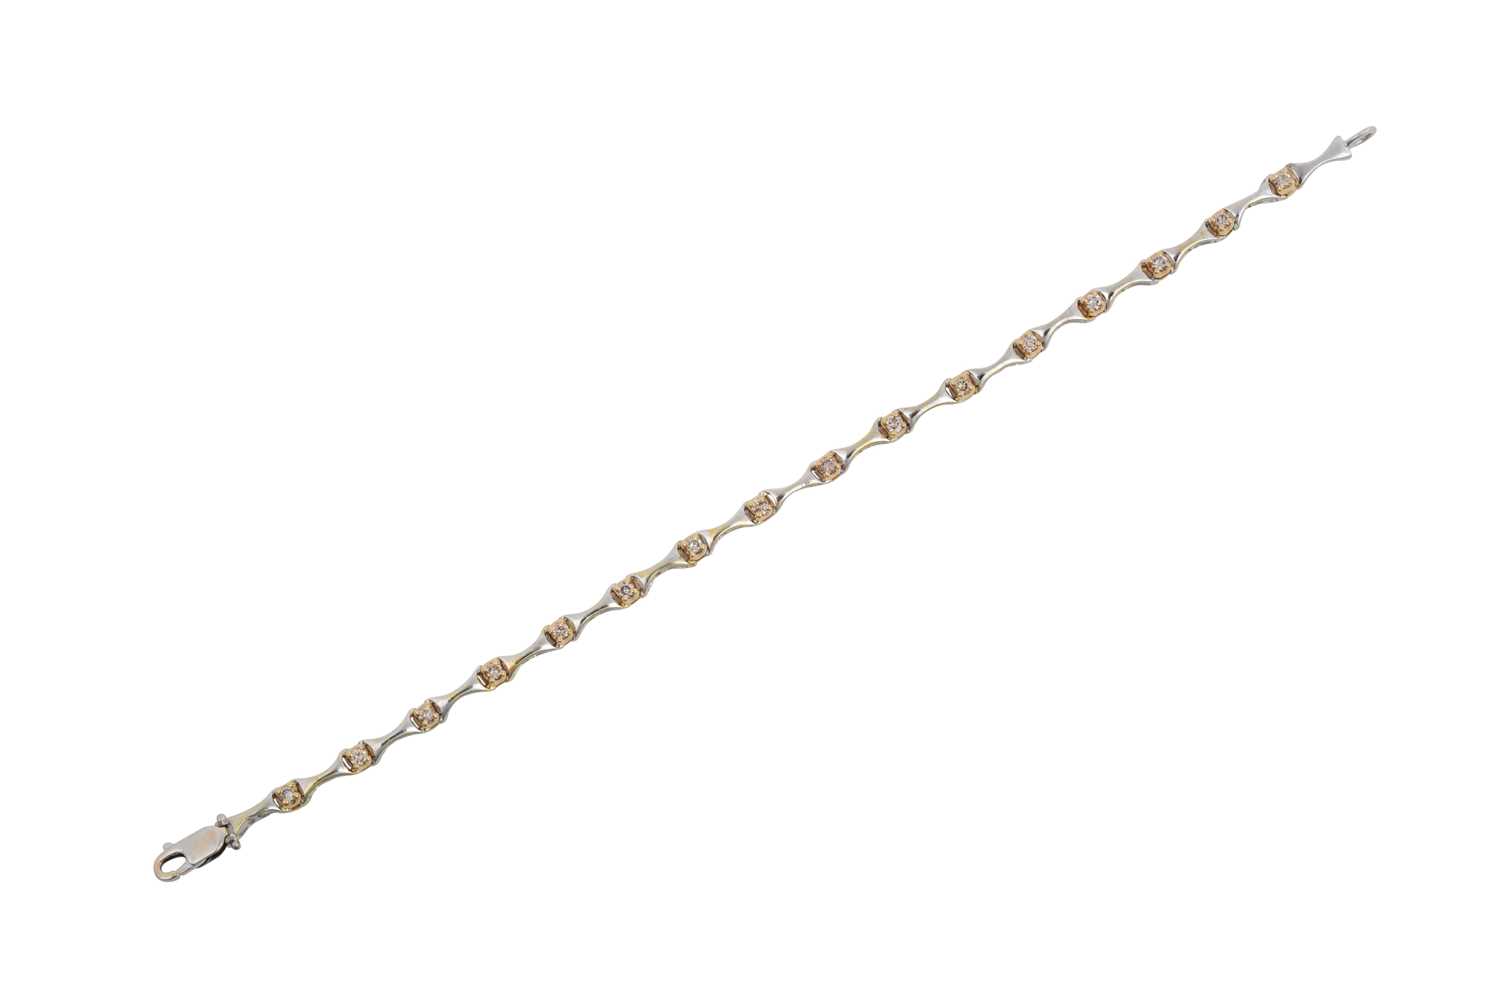 A Diamond Bracelet white tapered bars spaced by round brilliant cut diamonds in yellow claw